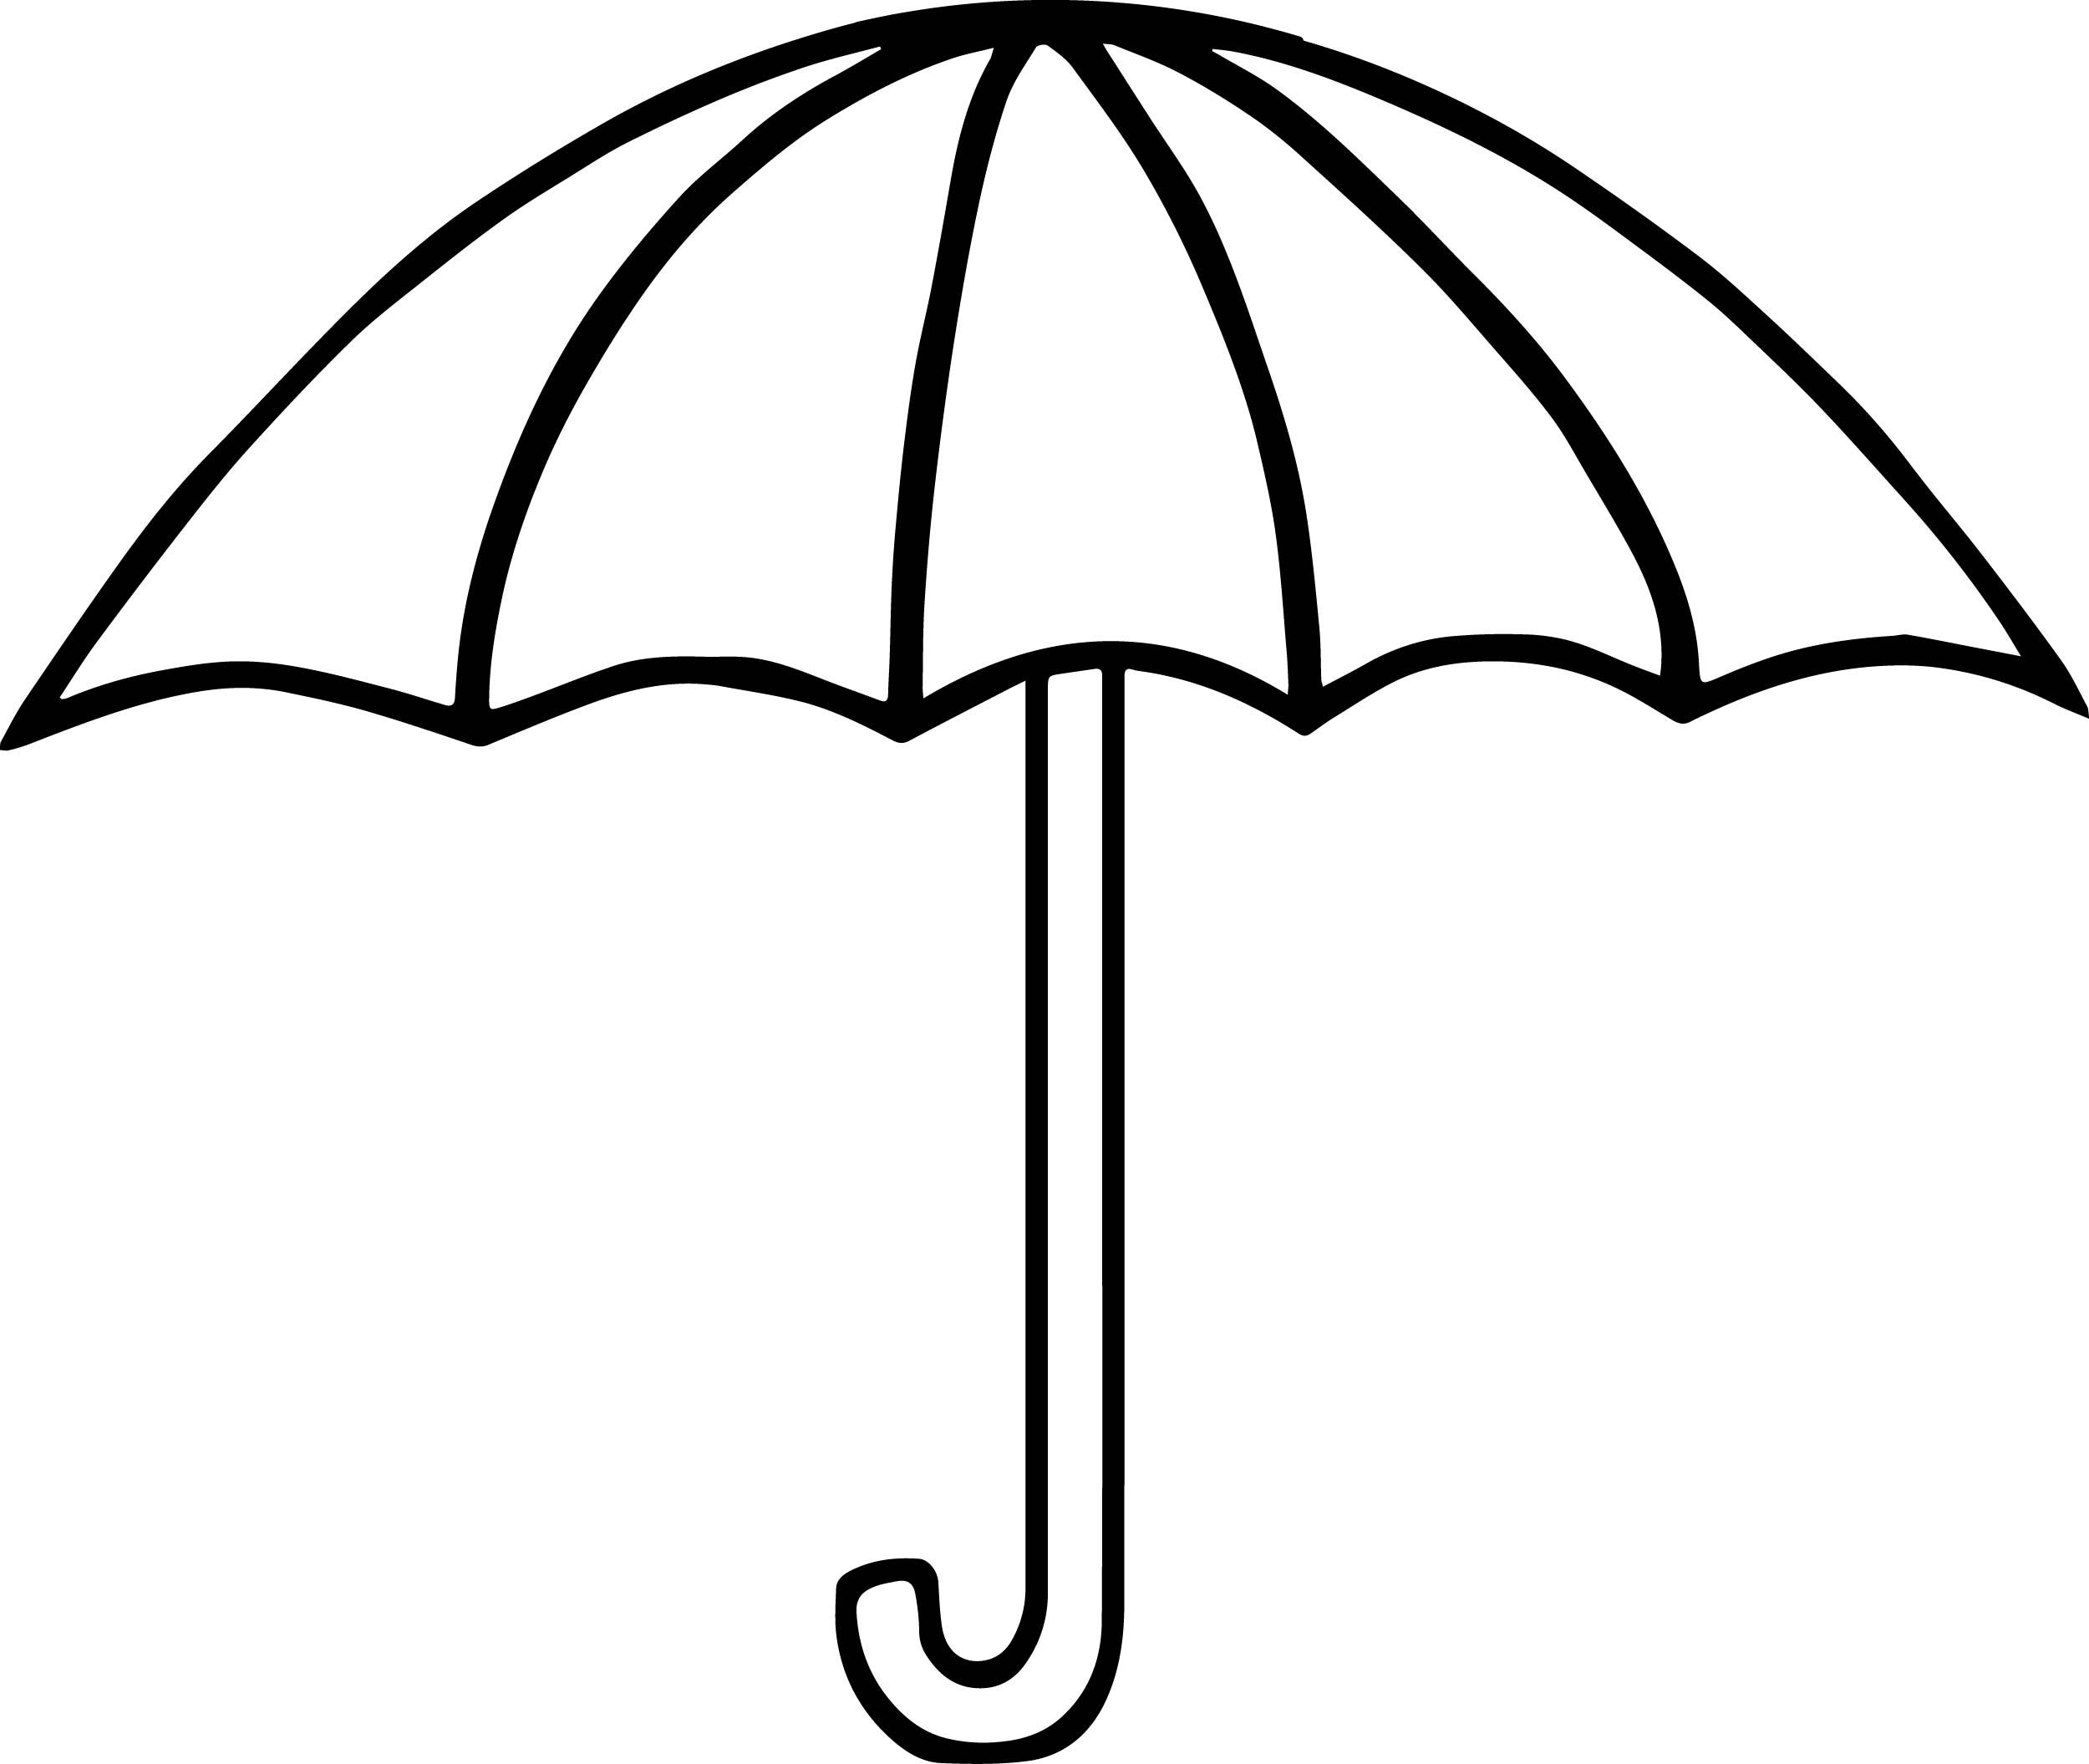 umbrella-coloring-pages-best-coloring-pages-for-kids